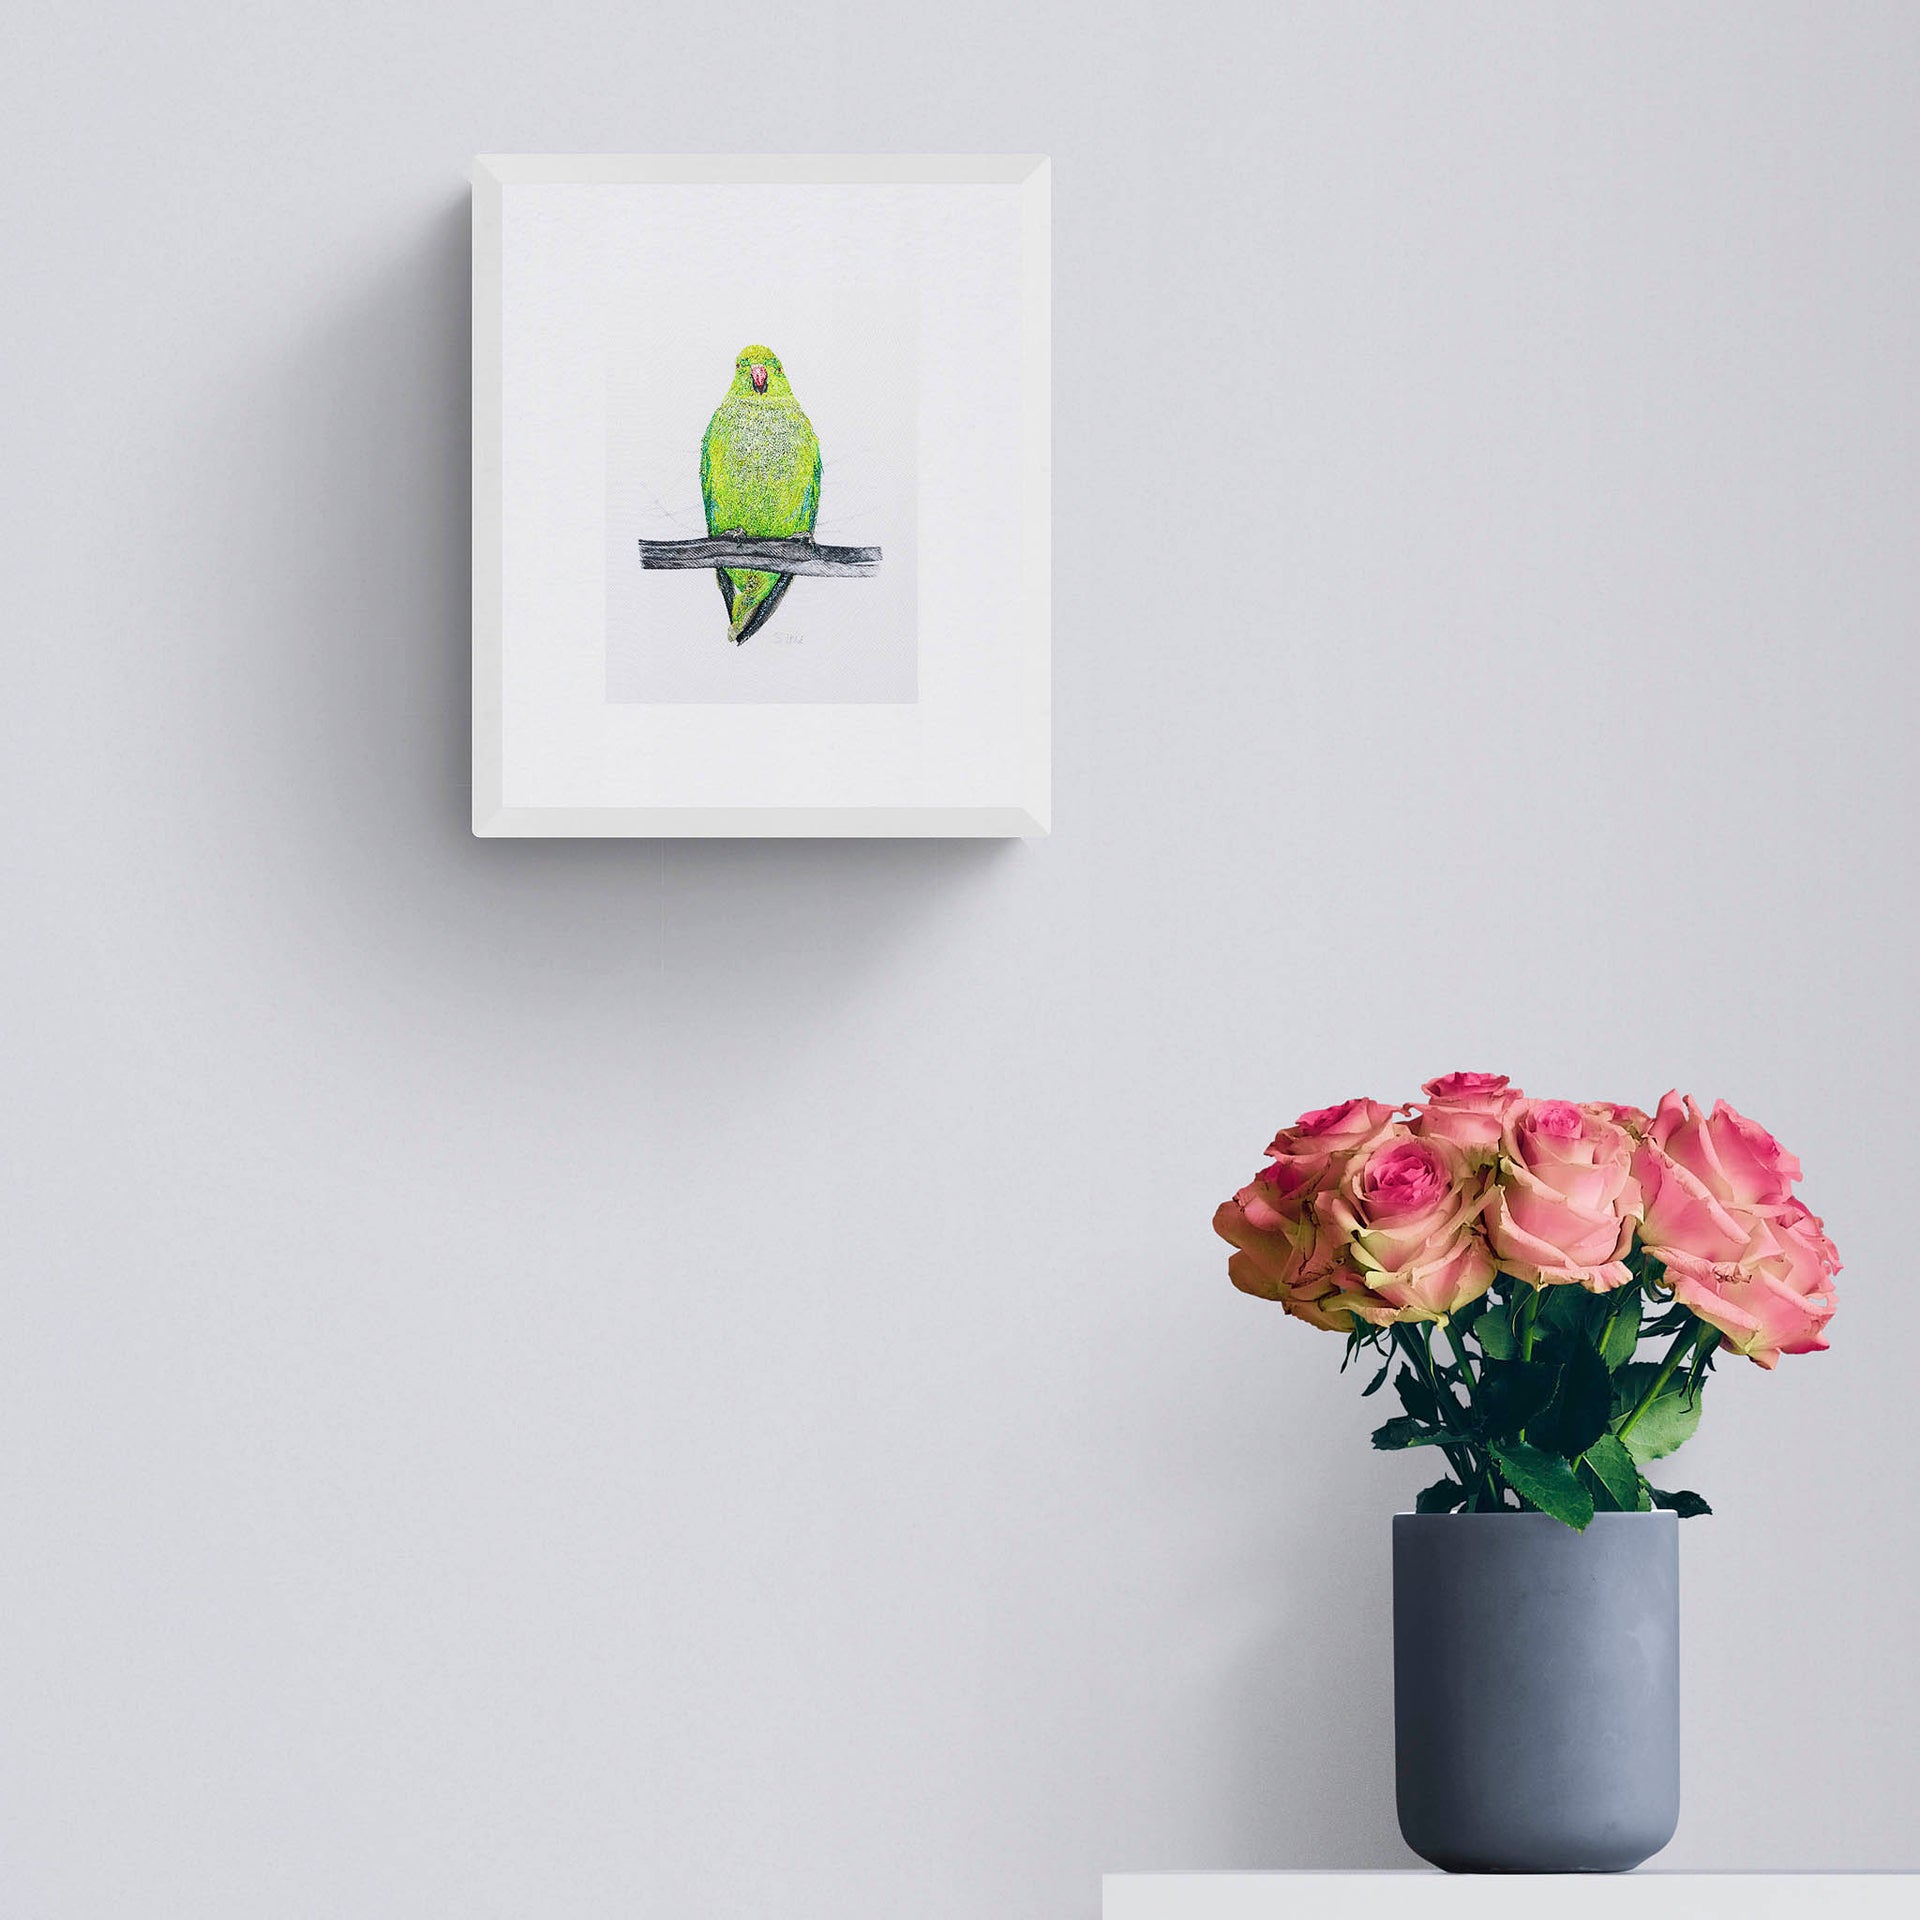 Hand embroidered parakeet framed on wall